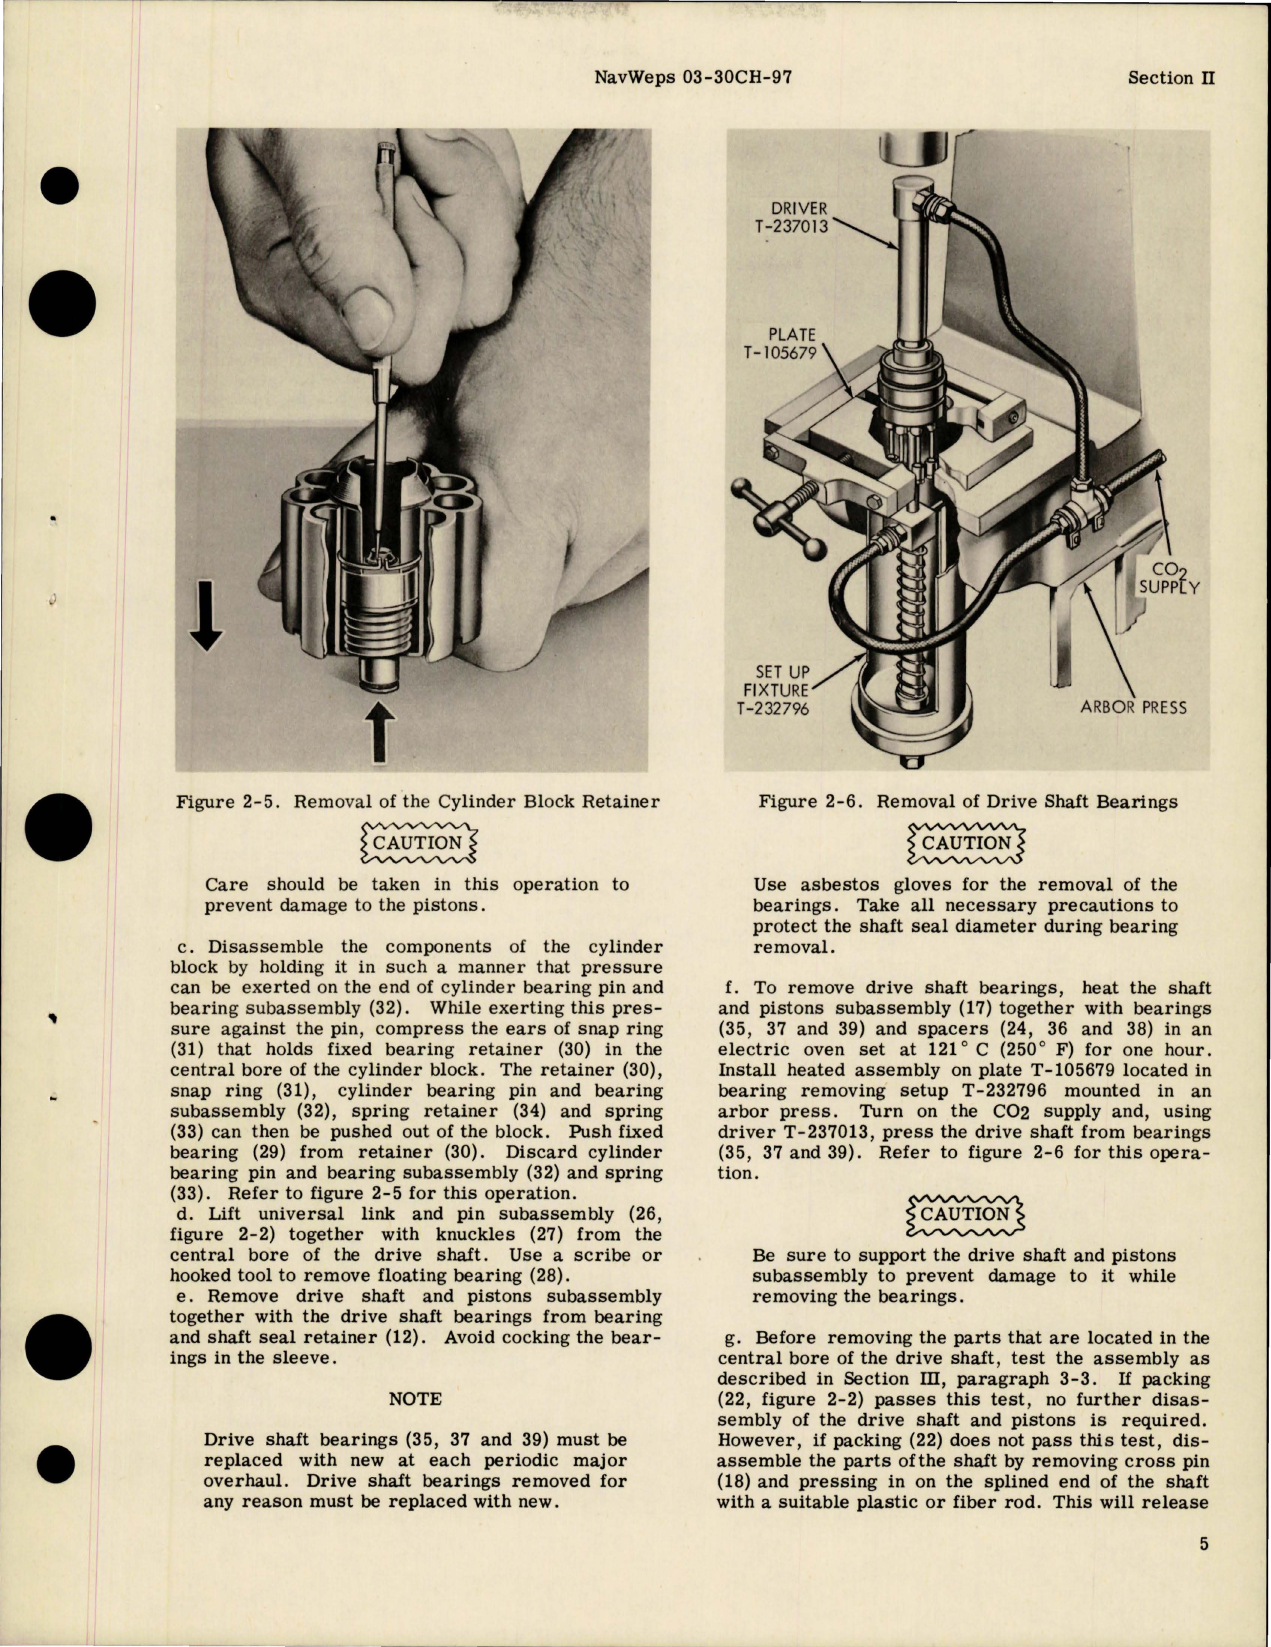 Sample page 9 from AirCorps Library document: Overhaul Instructions for Hydraulic Motor Assemblies